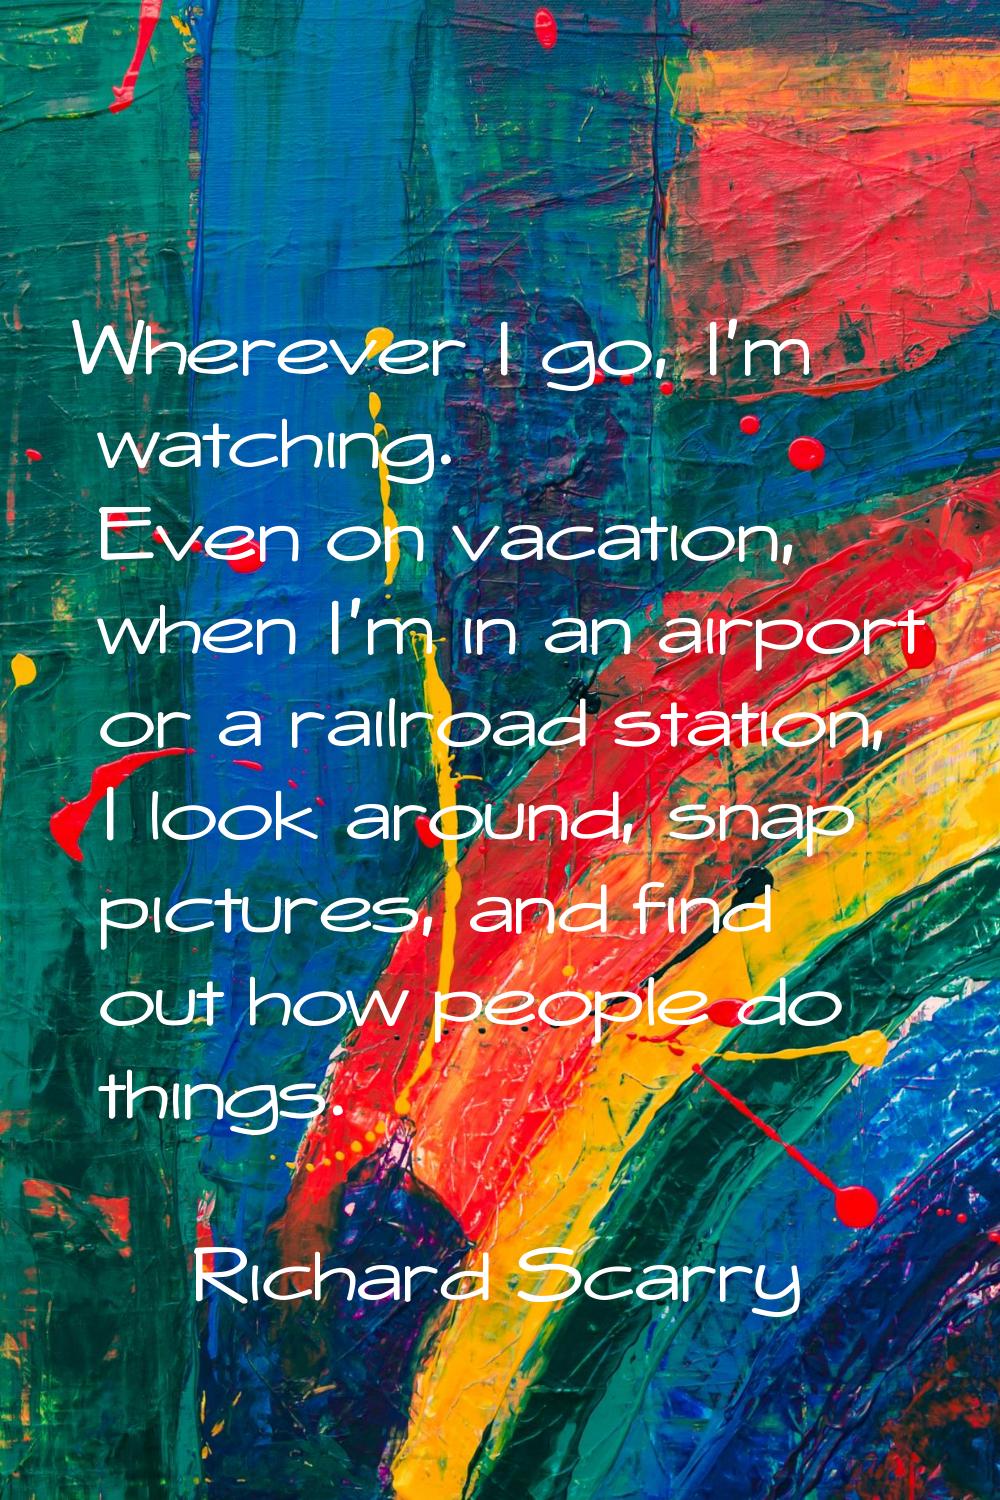 Wherever I go, I'm watching. Even on vacation, when I'm in an airport or a railroad station, I look